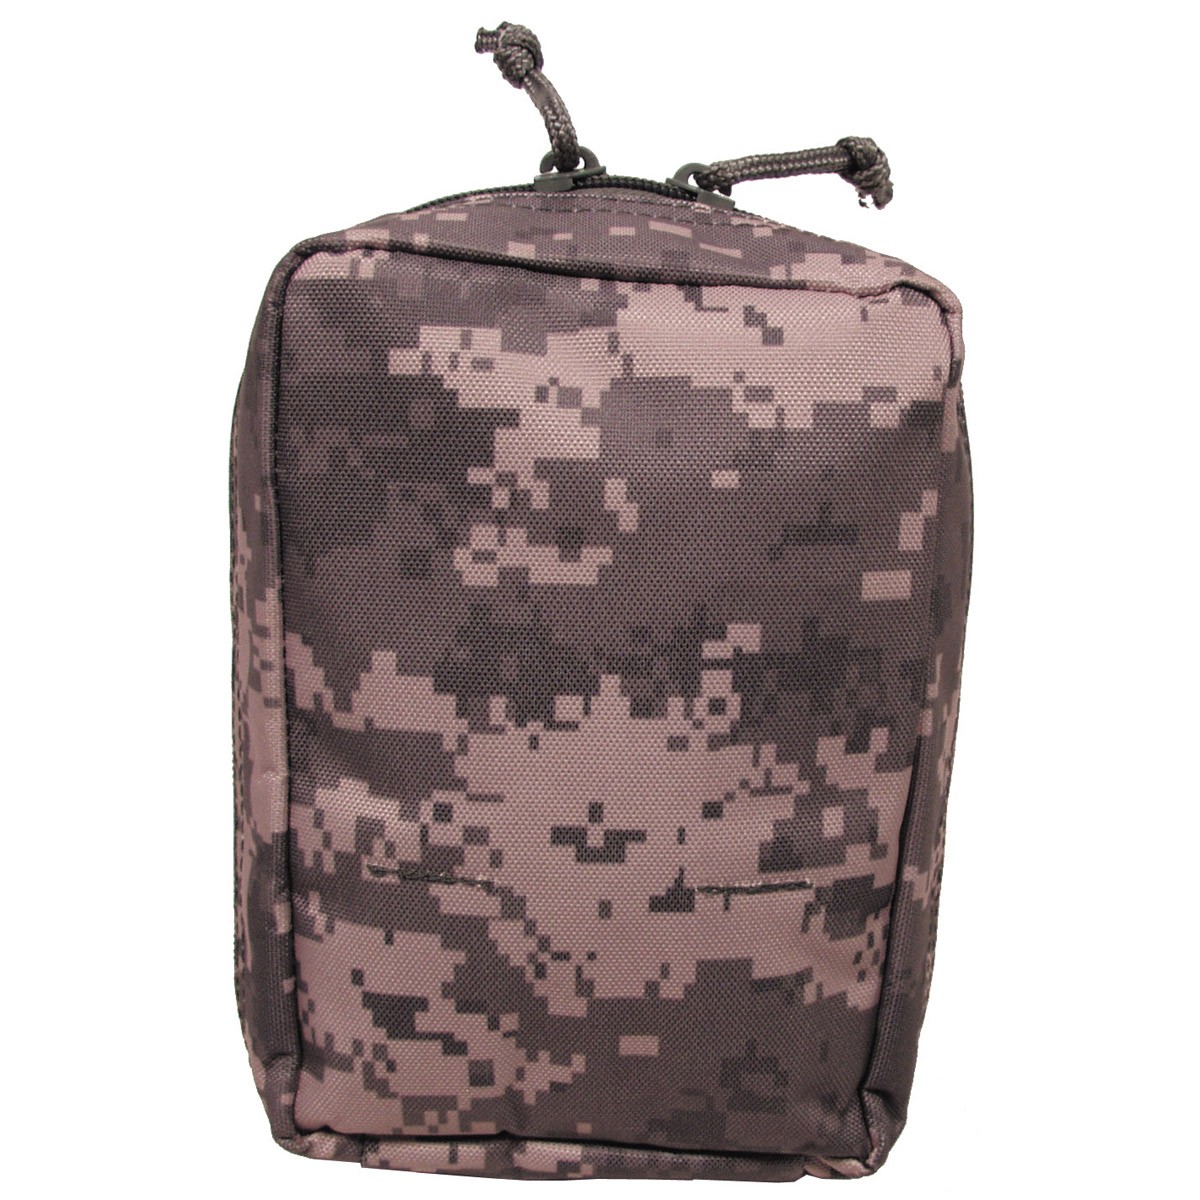 Tactical Utility Mollle Small Pouch - US Digital